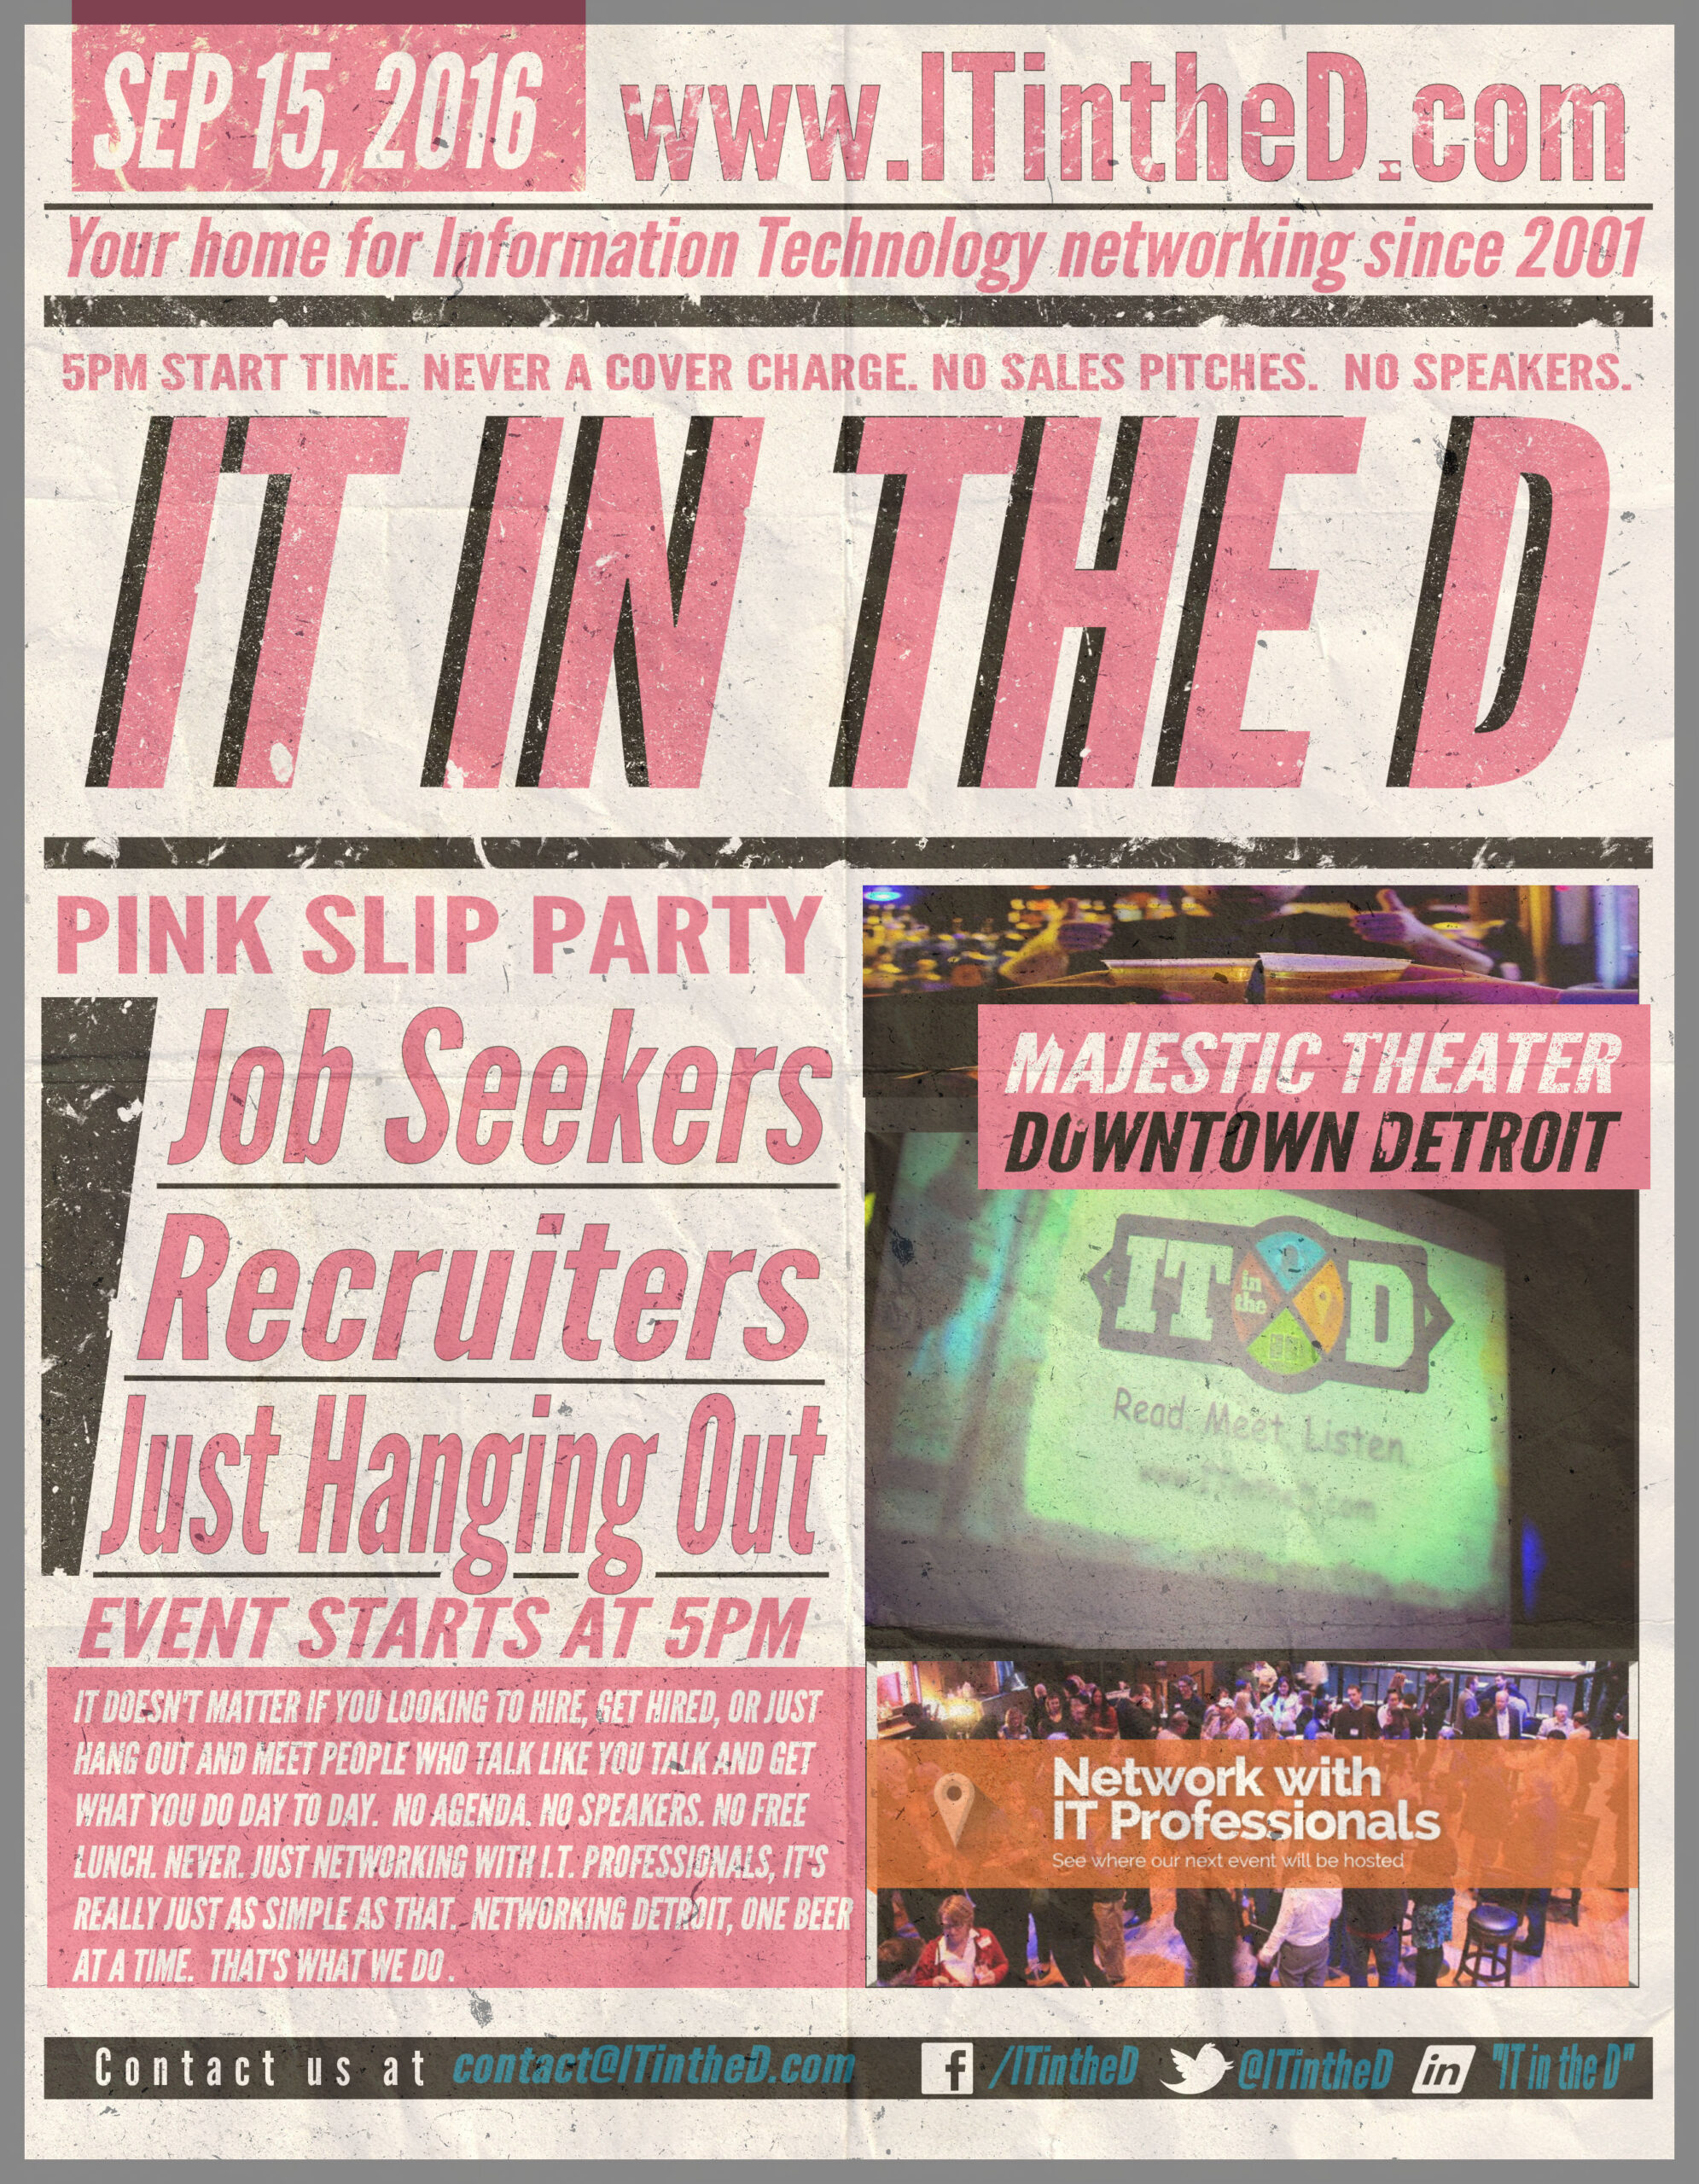 Pink Slip Party: Thursday, September 15, 2016 at Majestic Theater